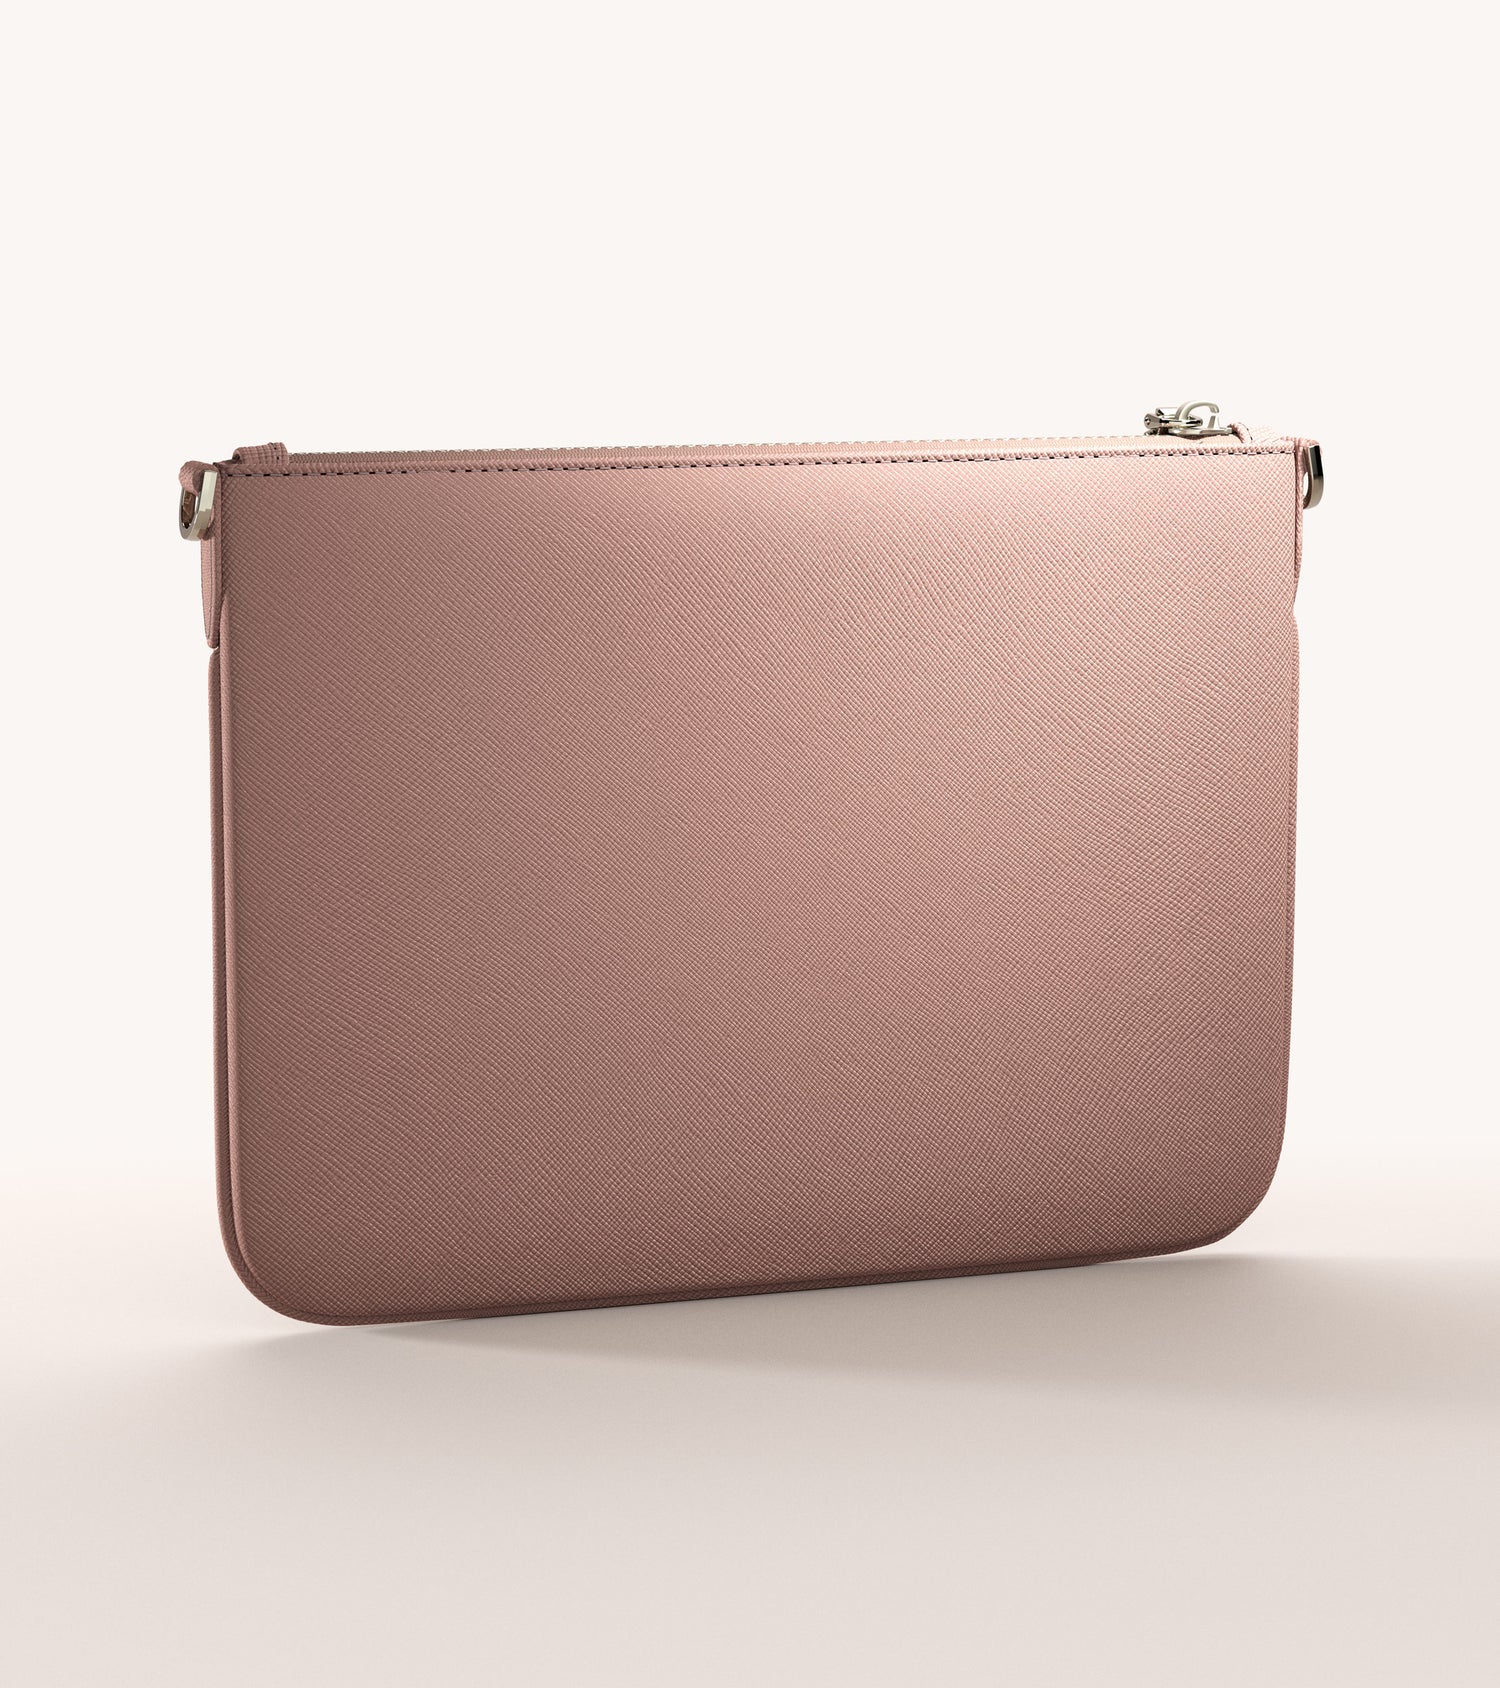 ZOEVA - The Everyday Clutch (CHAMPAGNE) - ACCESSORIES